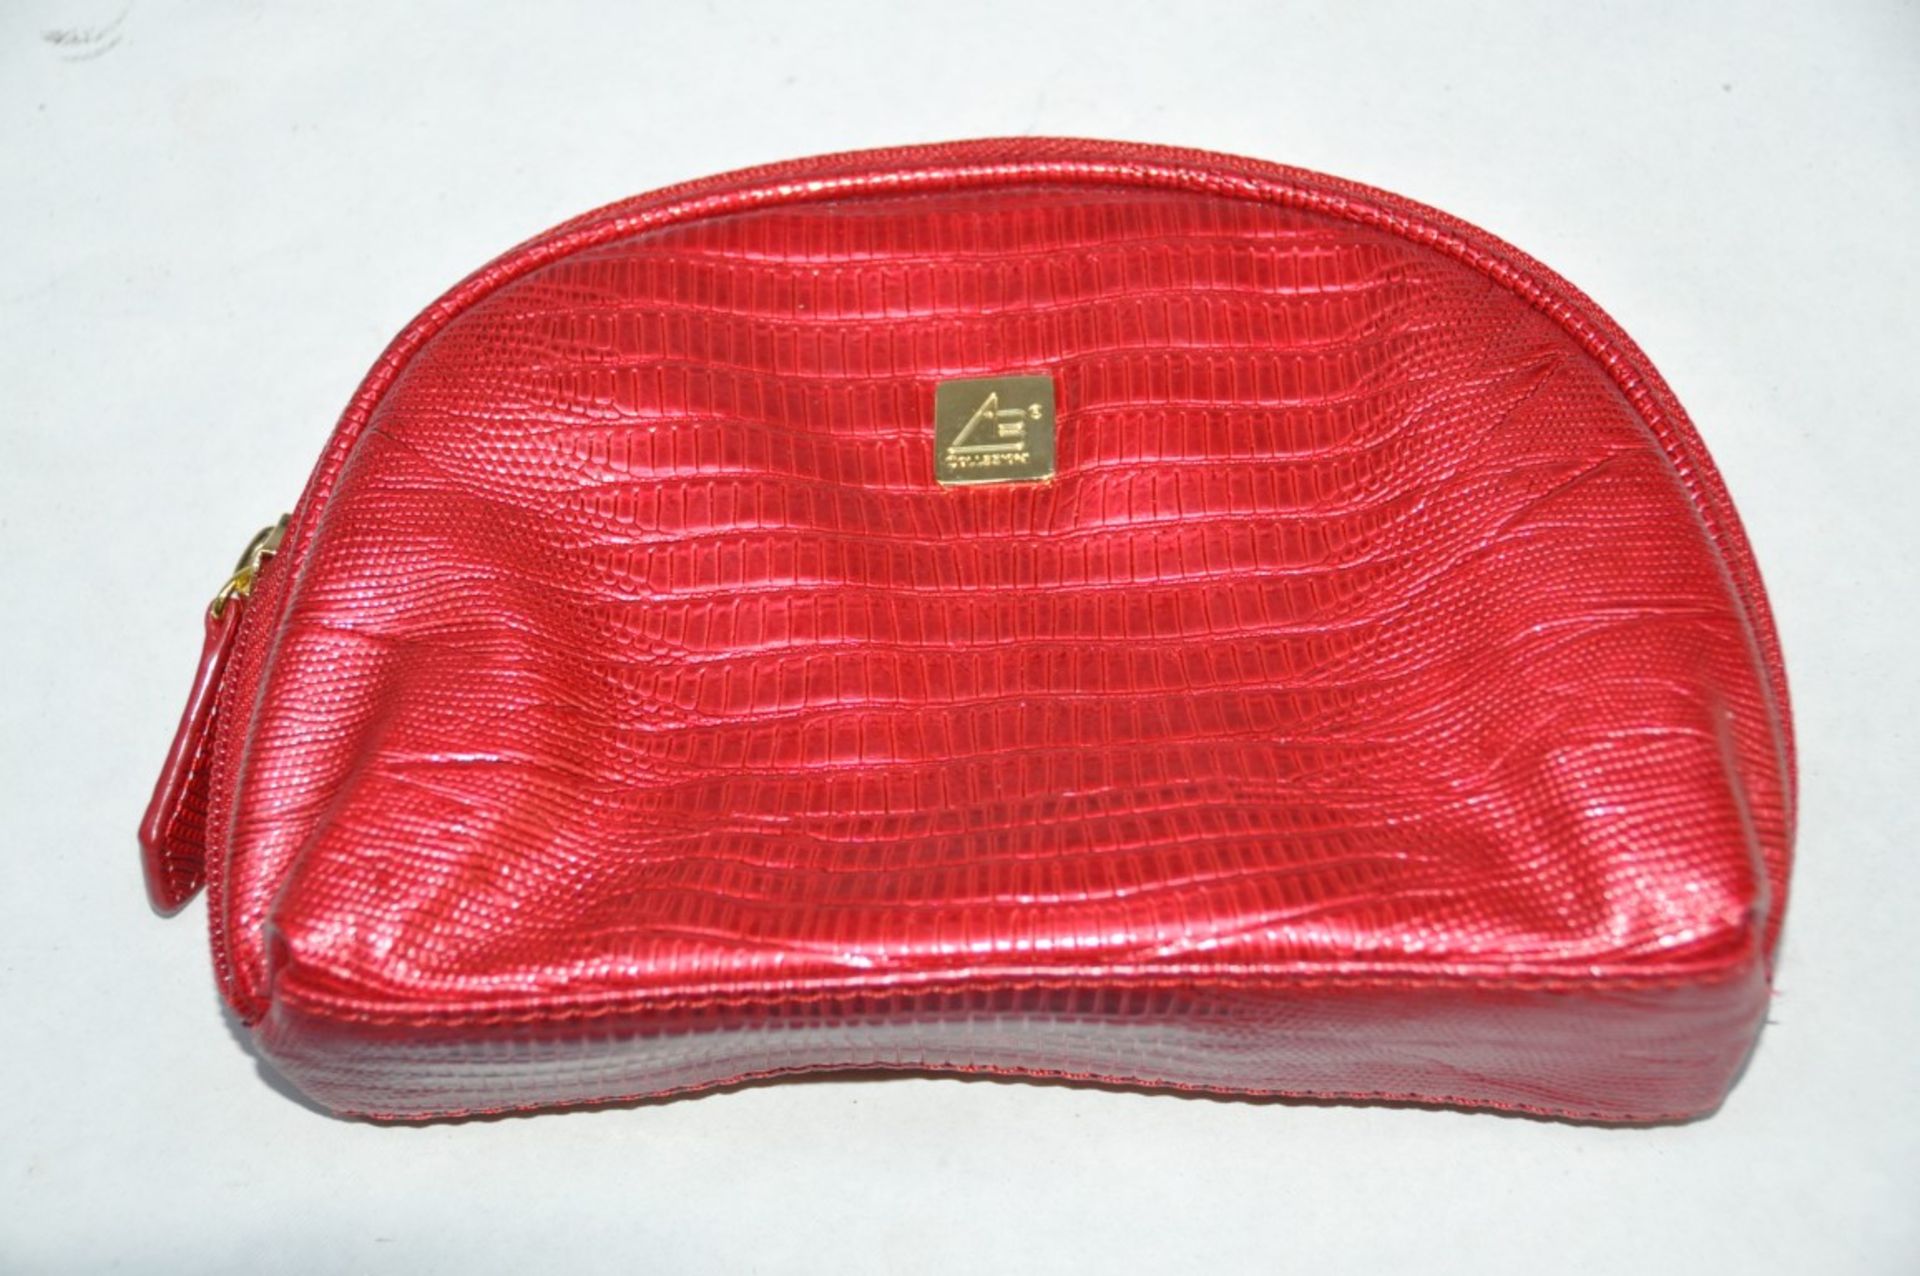 1 x "AB Collezioni" Italian Genuine Leather-Bound Luxury 3-Peice Travelling Vanity Set In Red ( - Image 3 of 6